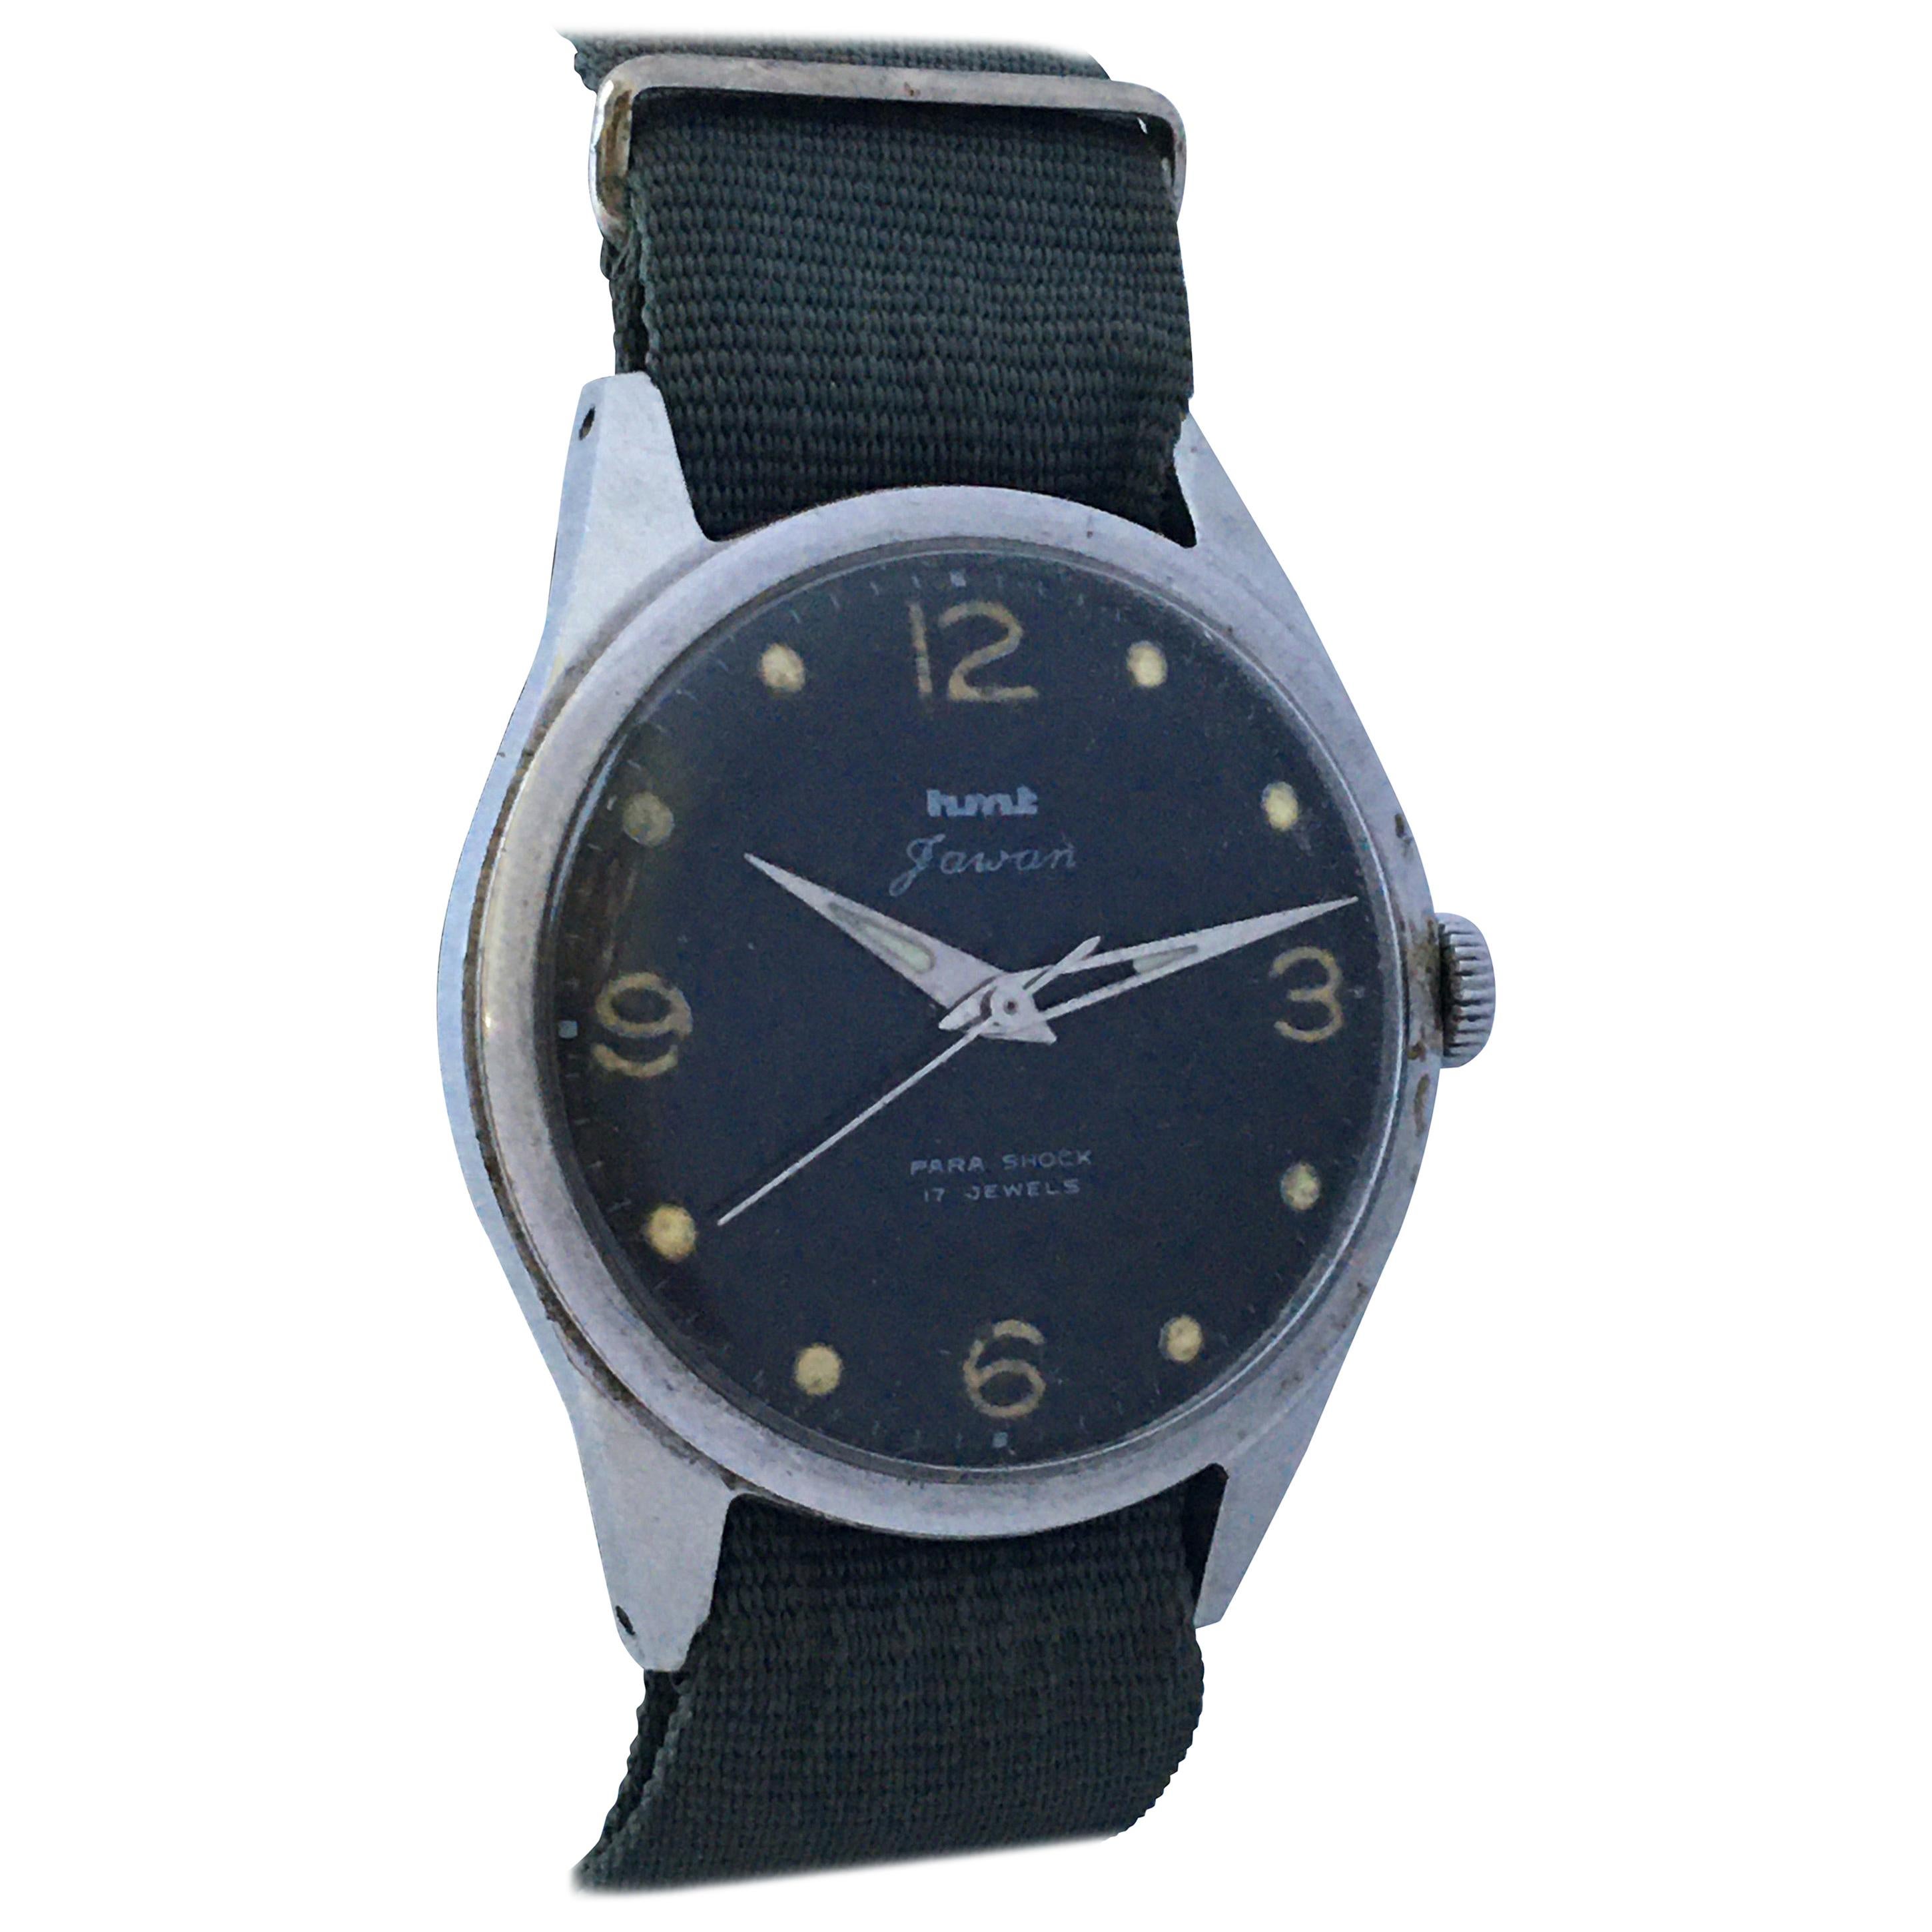 Vintage 1950s Stainless Steel Black Dial Mechanical Military Watch For Sale